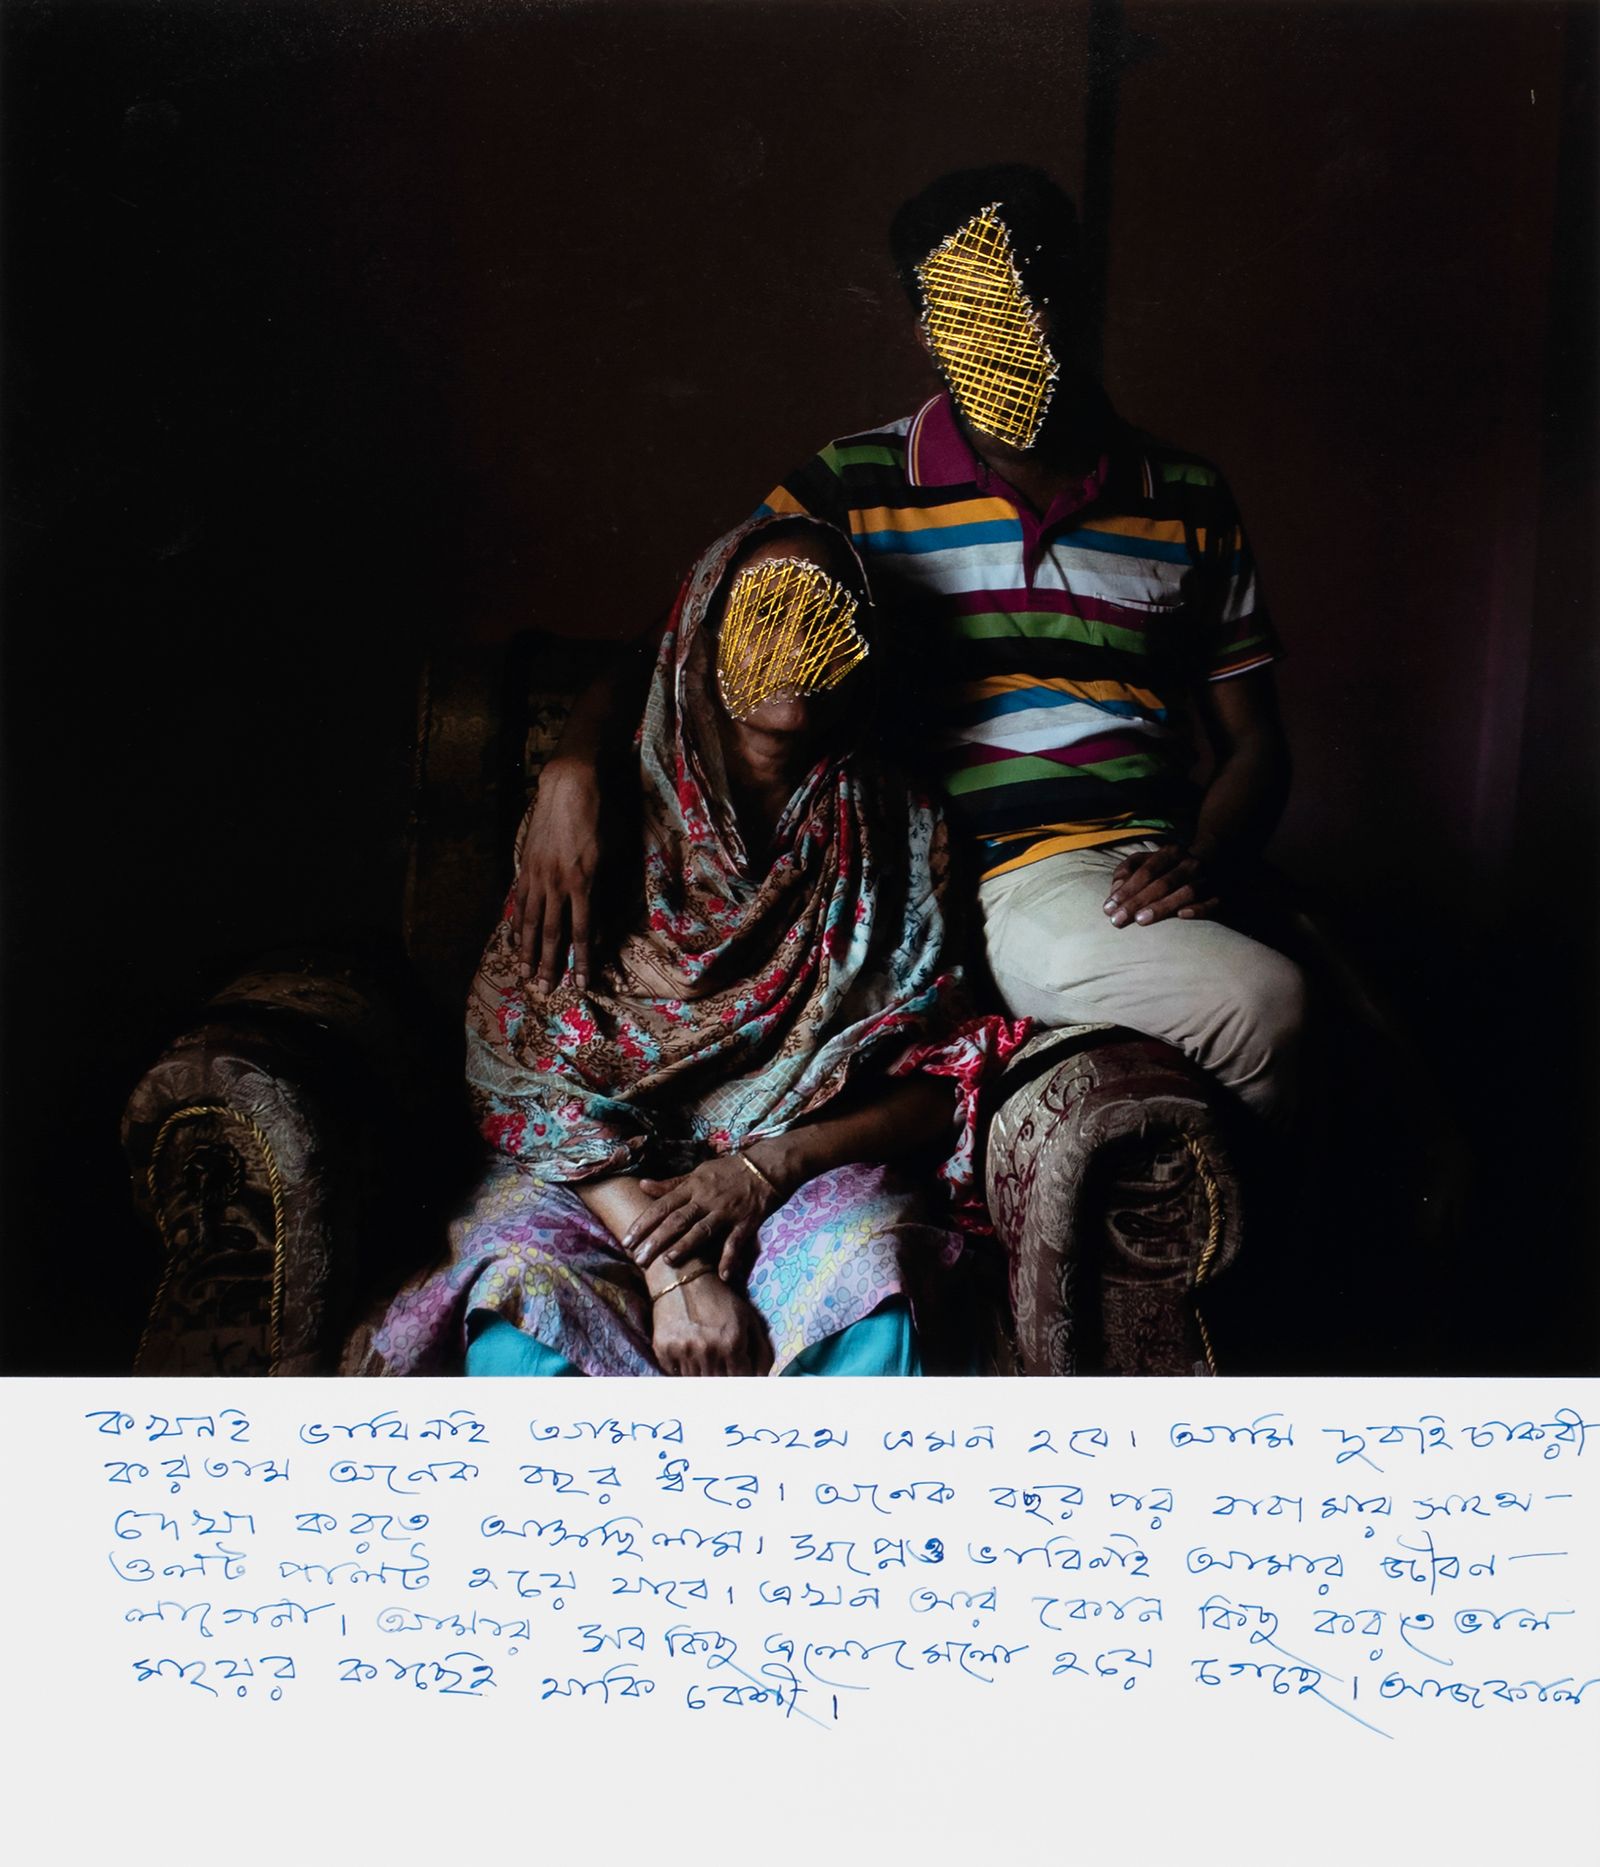 © Ashfika Rahman - Image from the Files of the Disappeared photography project